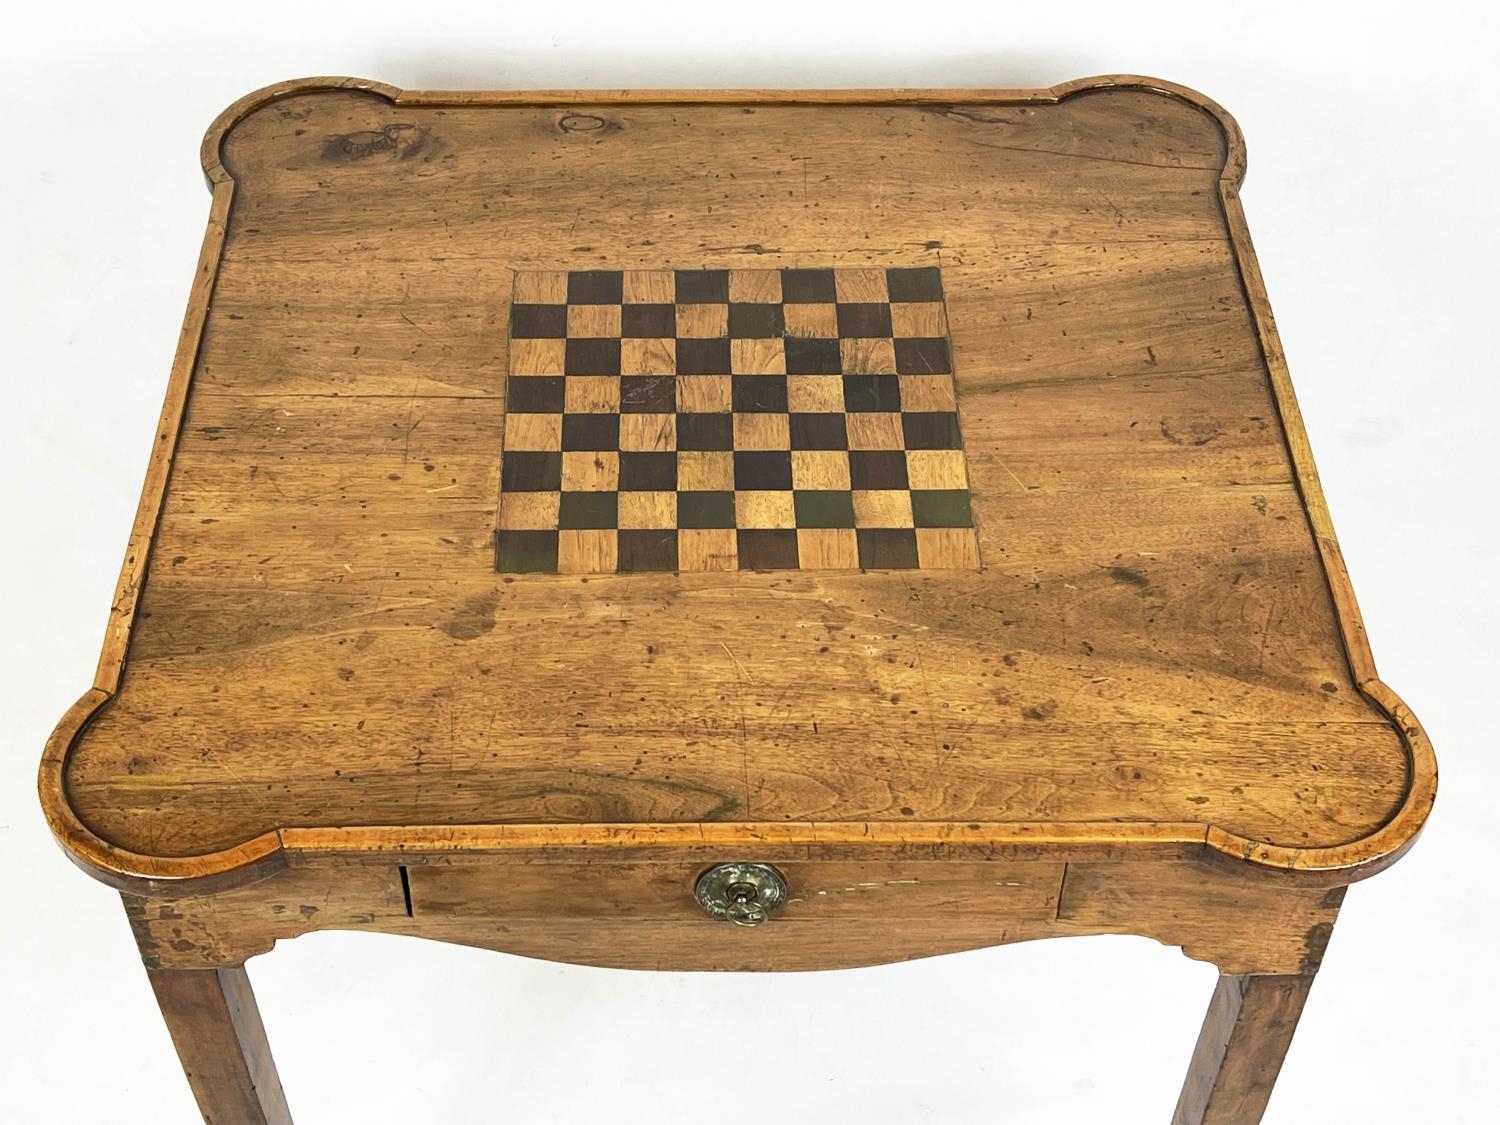 GAMES TABLE, 73cm H x 84cm W x 82cm D 18th century Italian walnut with chessboard inlaid top and - Image 3 of 7